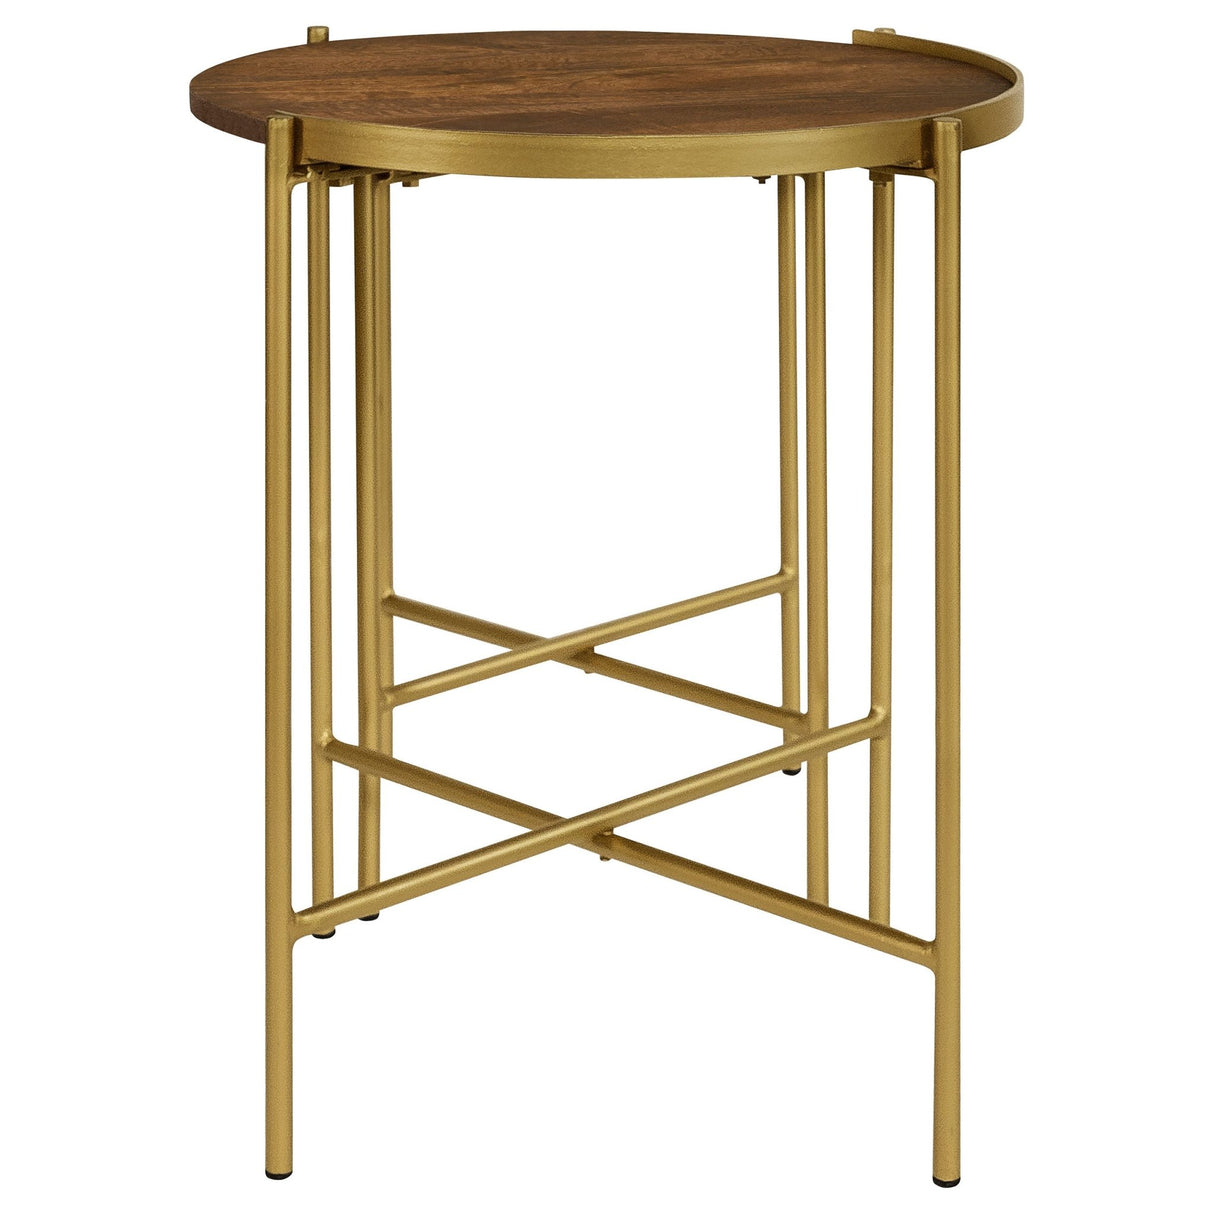 2 Pc Nesting Table - Malka 2-piece Round Nesting Table Dark Brown and Gold